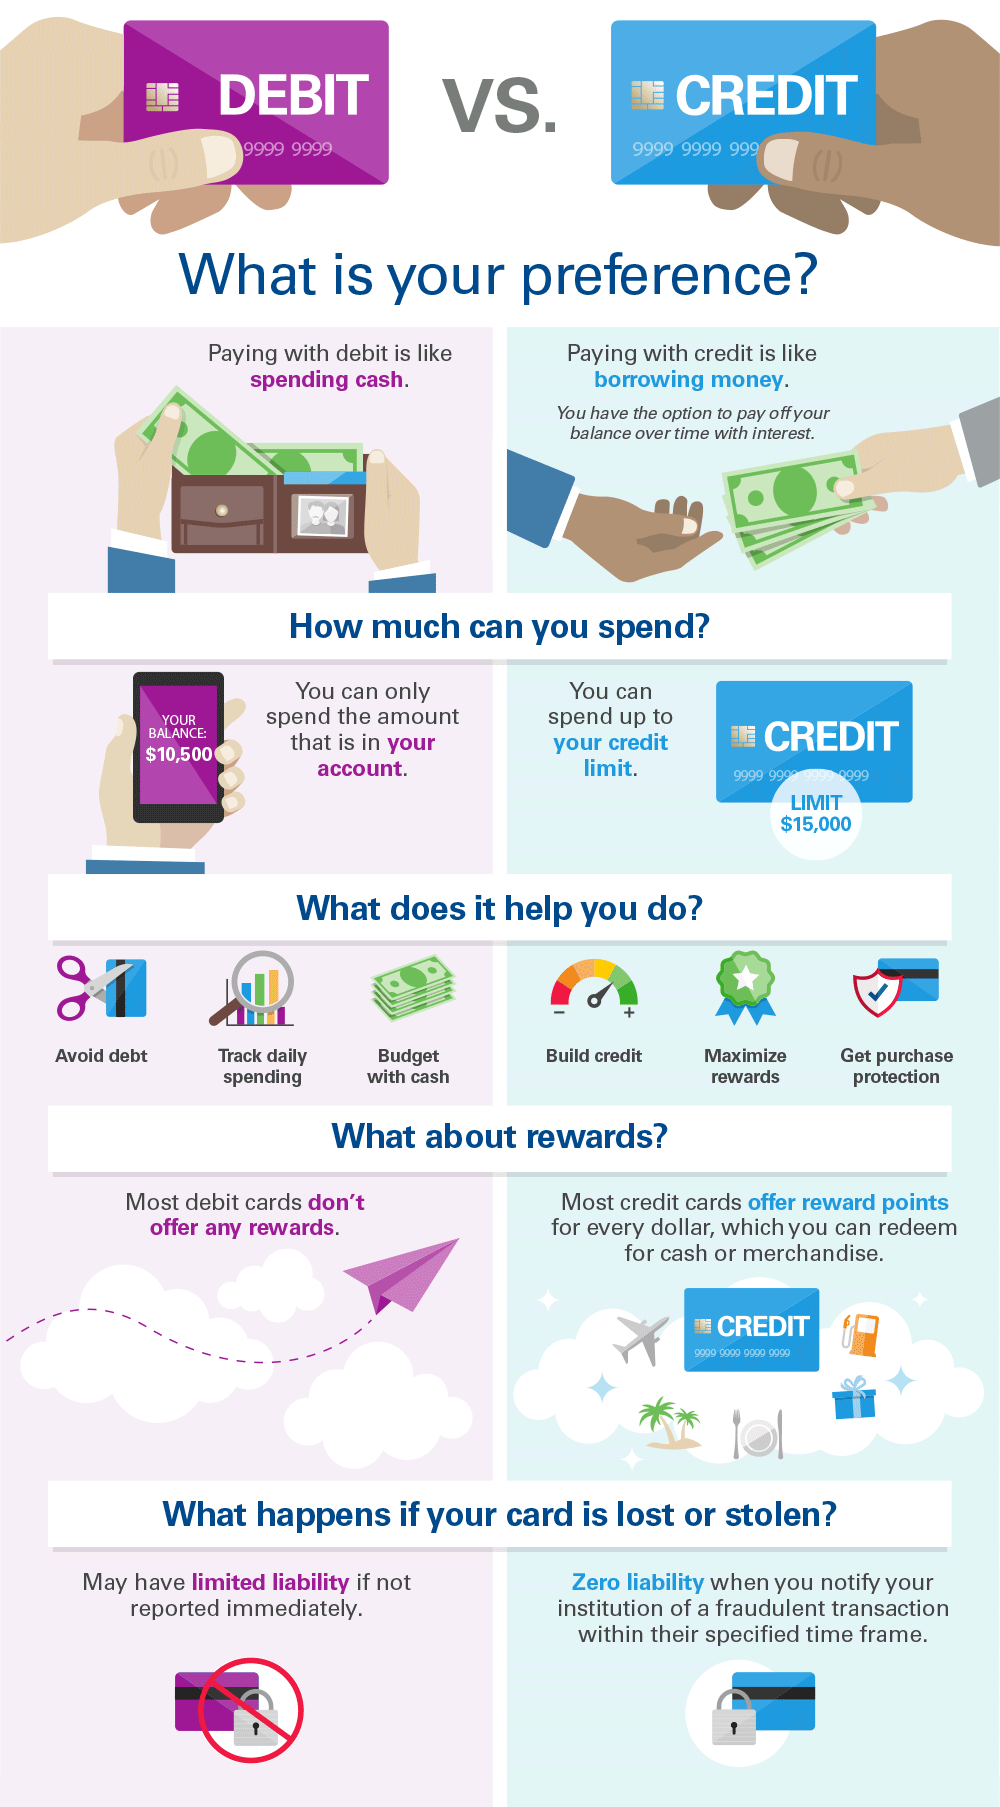 Debit vs. Credit: What's your preference?